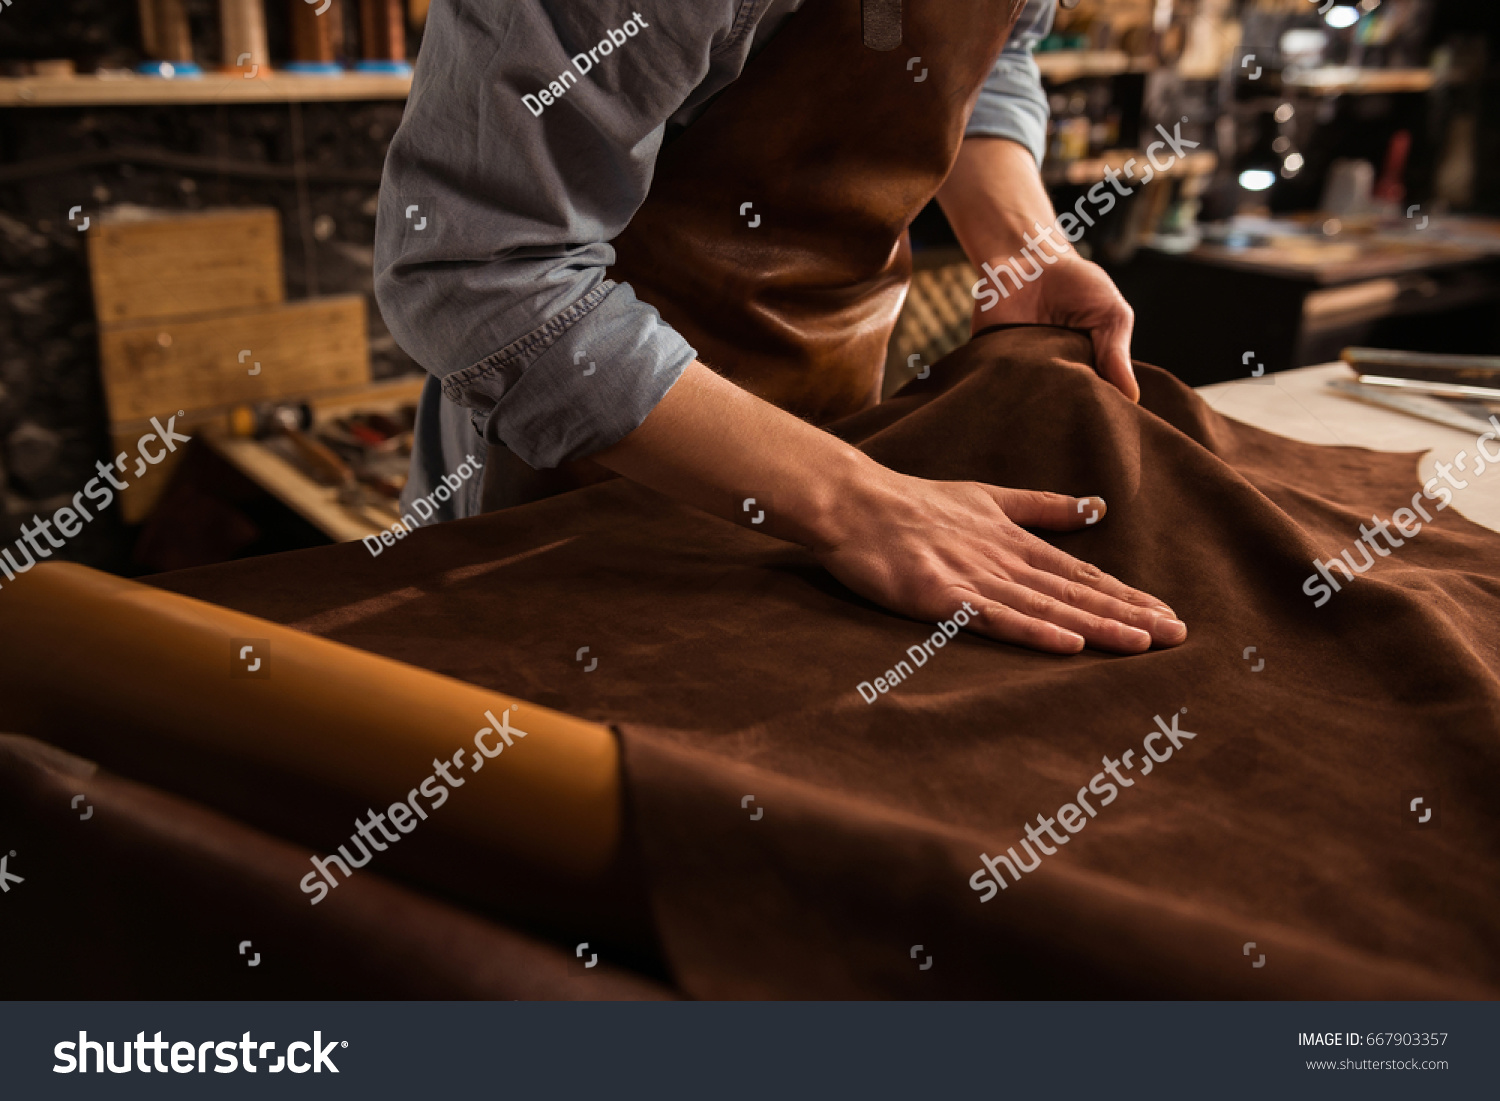 Close up of a male shoemaker working with leather textile at his workshop #667903357